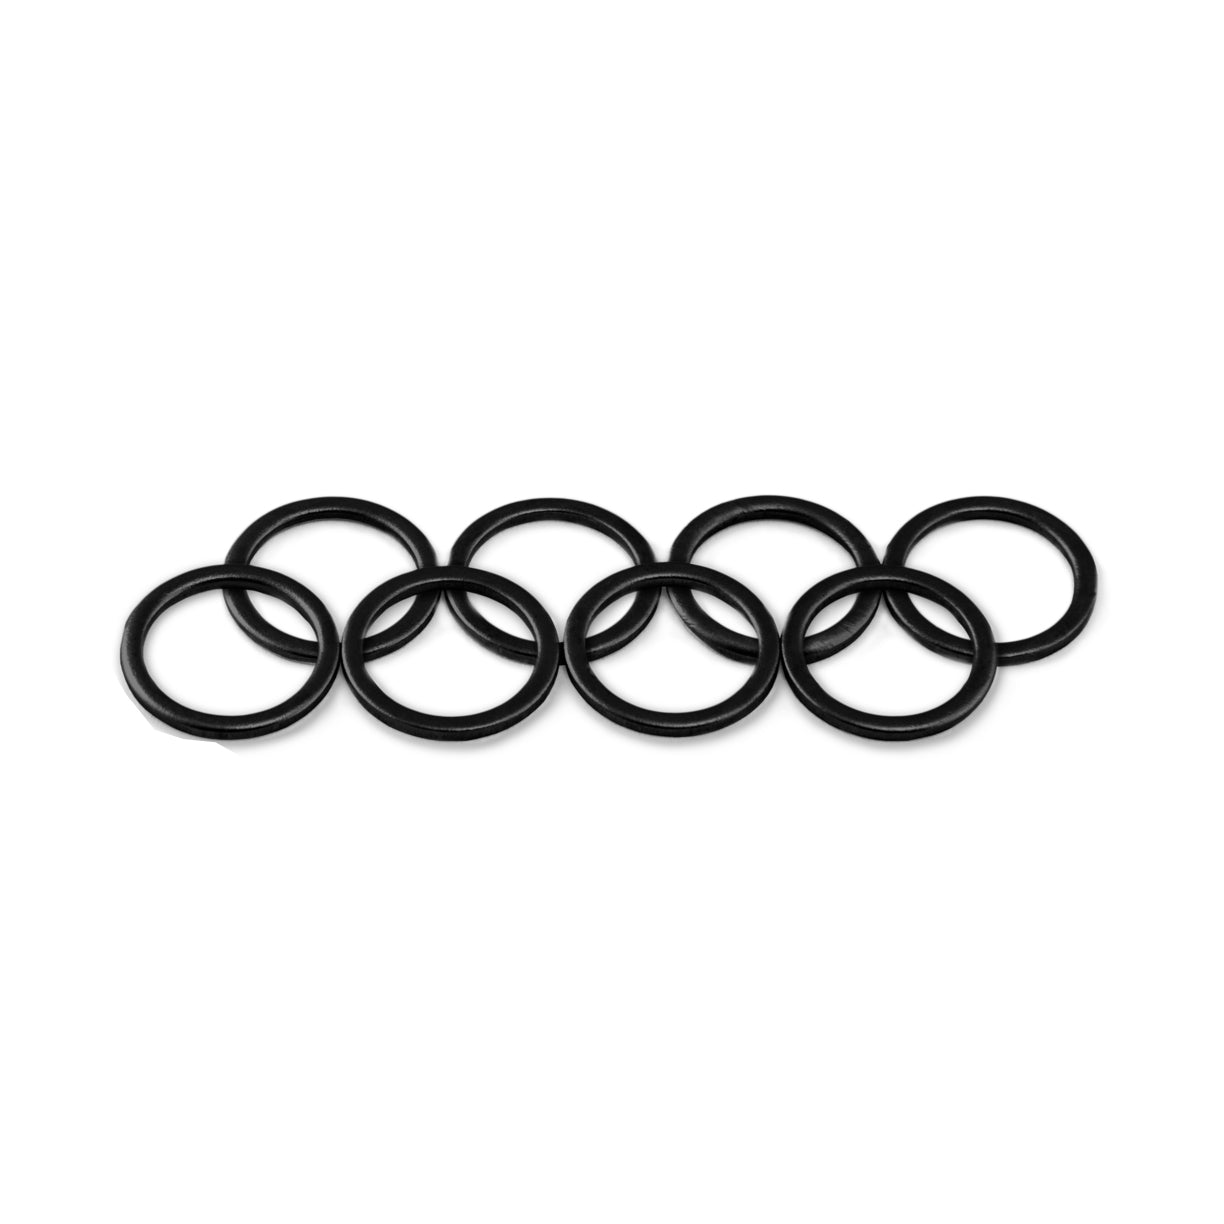 Truck Axle Washers (Set of 8)